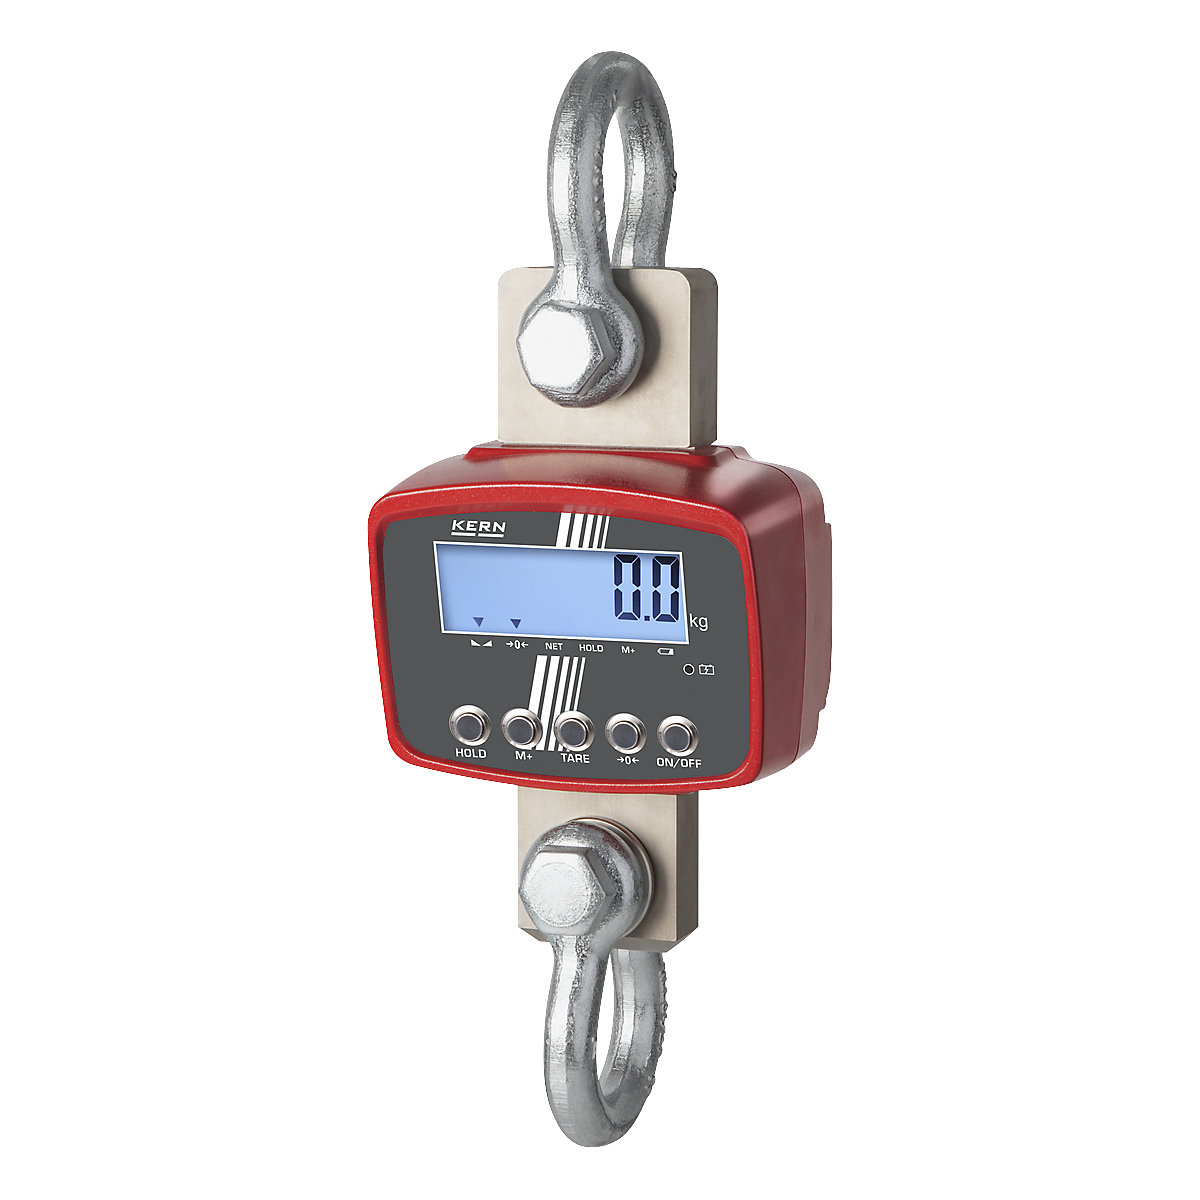 Crane scales – KERN, high resolution, weighing range up to 600 kg, read-out accuracy 50 / 100 / 200 g-3